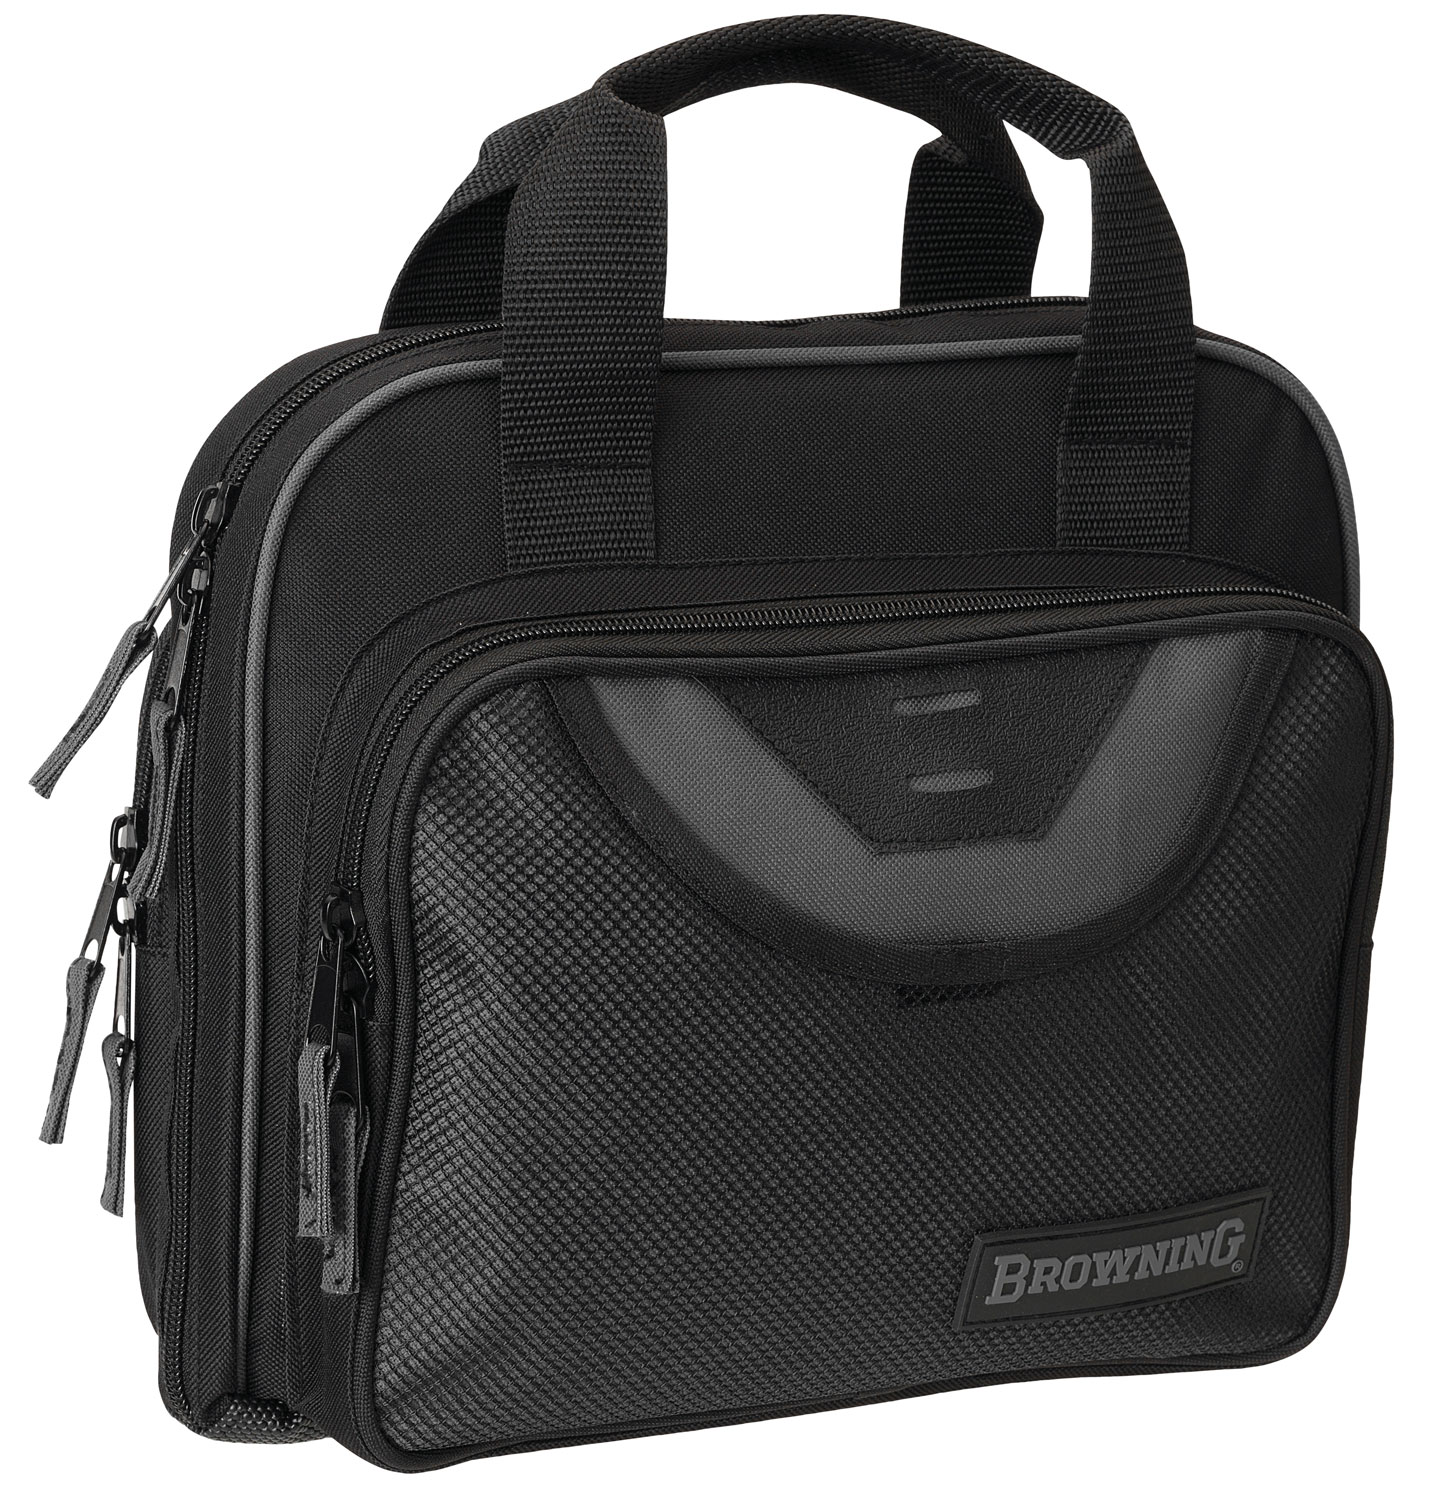 Browning 12902099 Crossfire Double Pistol Case made of 600D Polyester with Black Finish  Gray Trim, Closed-Cell Foam Padding, Full Length Zipper  Web Carry Handles | 023614369189